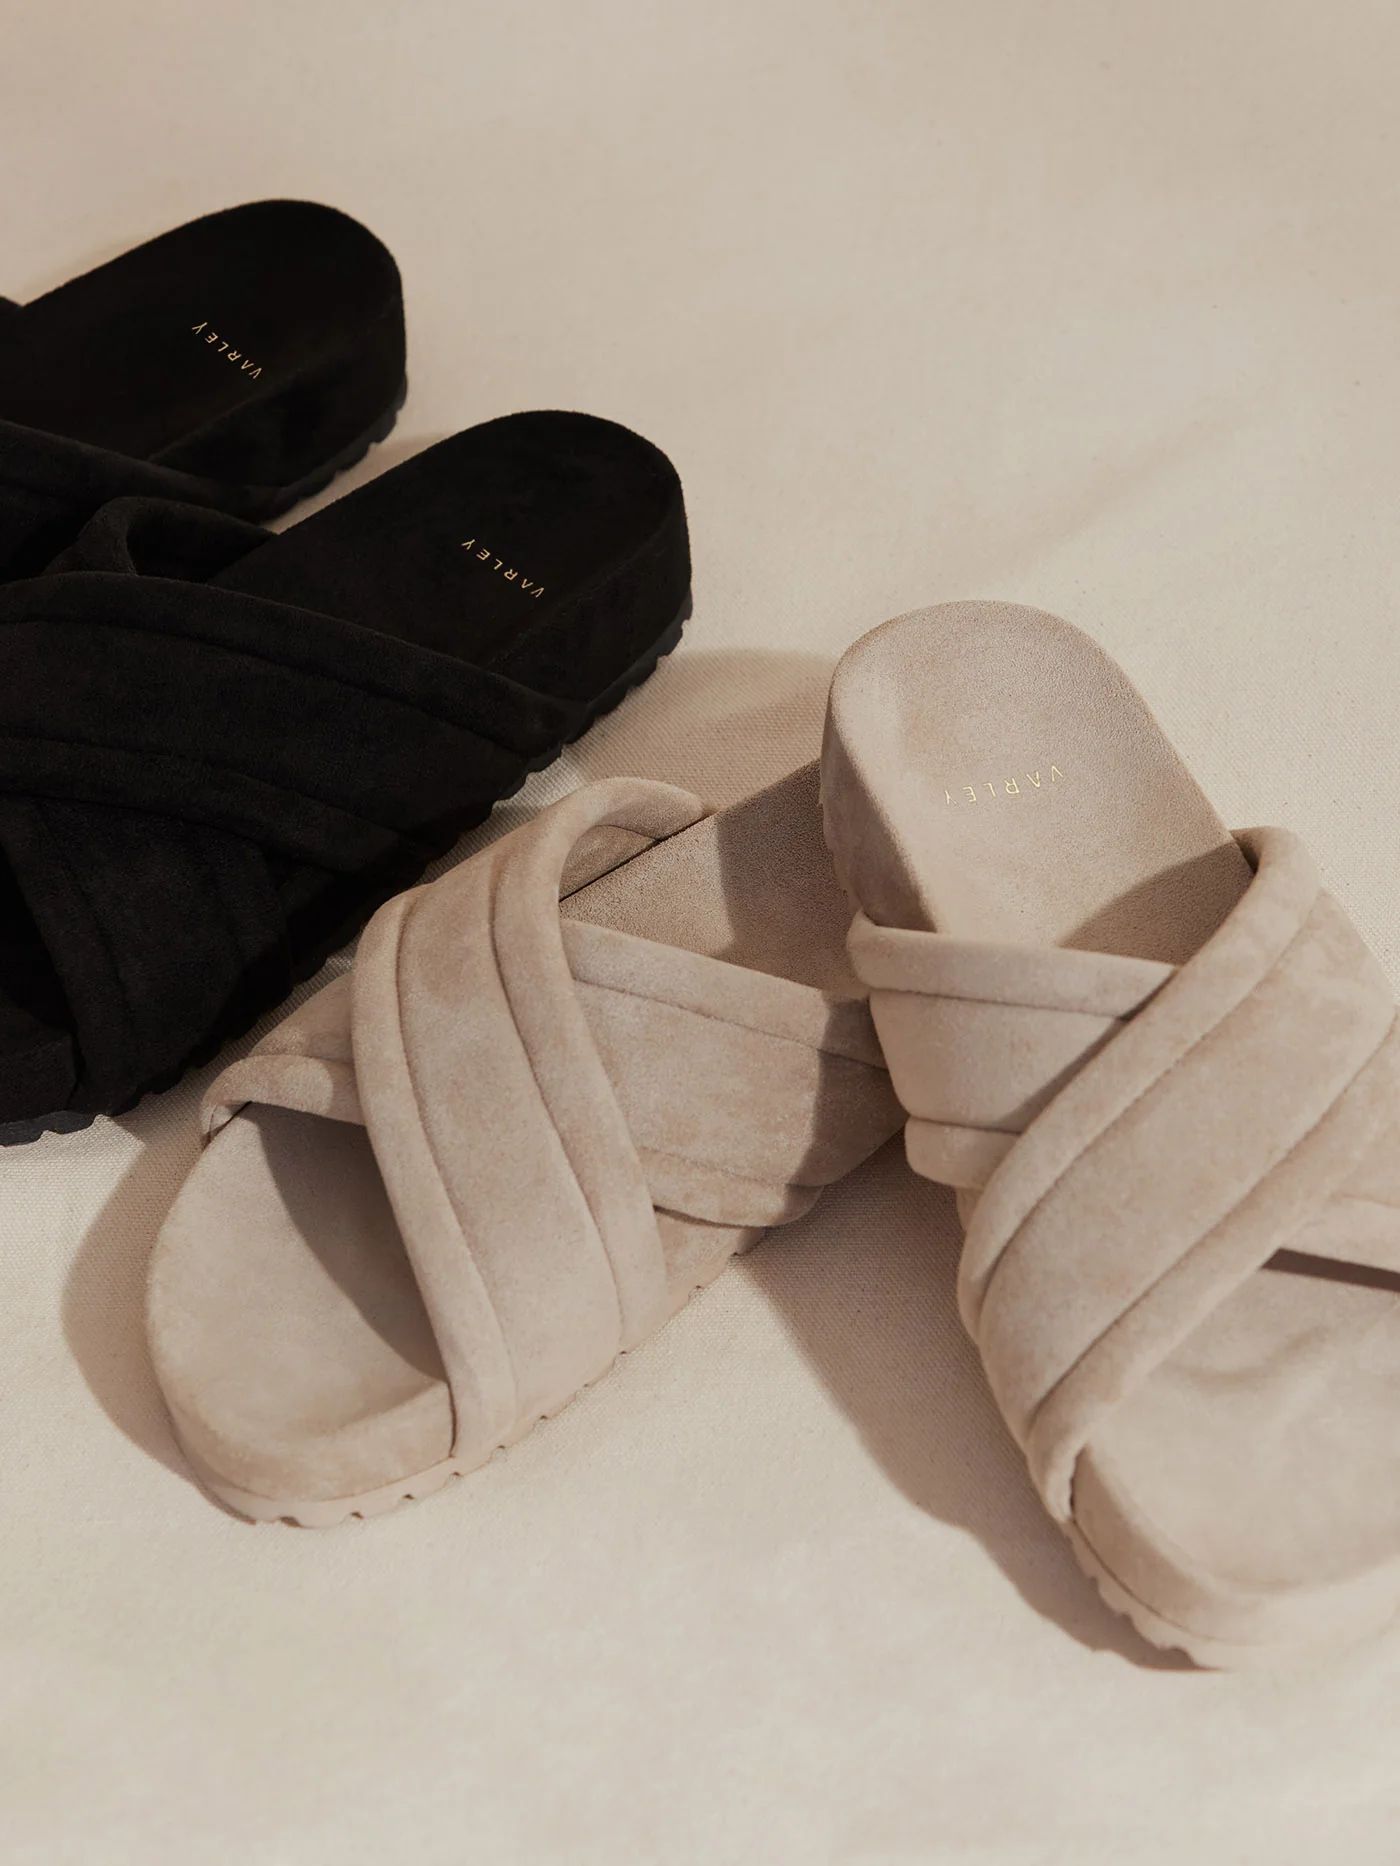 Ronley Quilted Slides | Varley USA